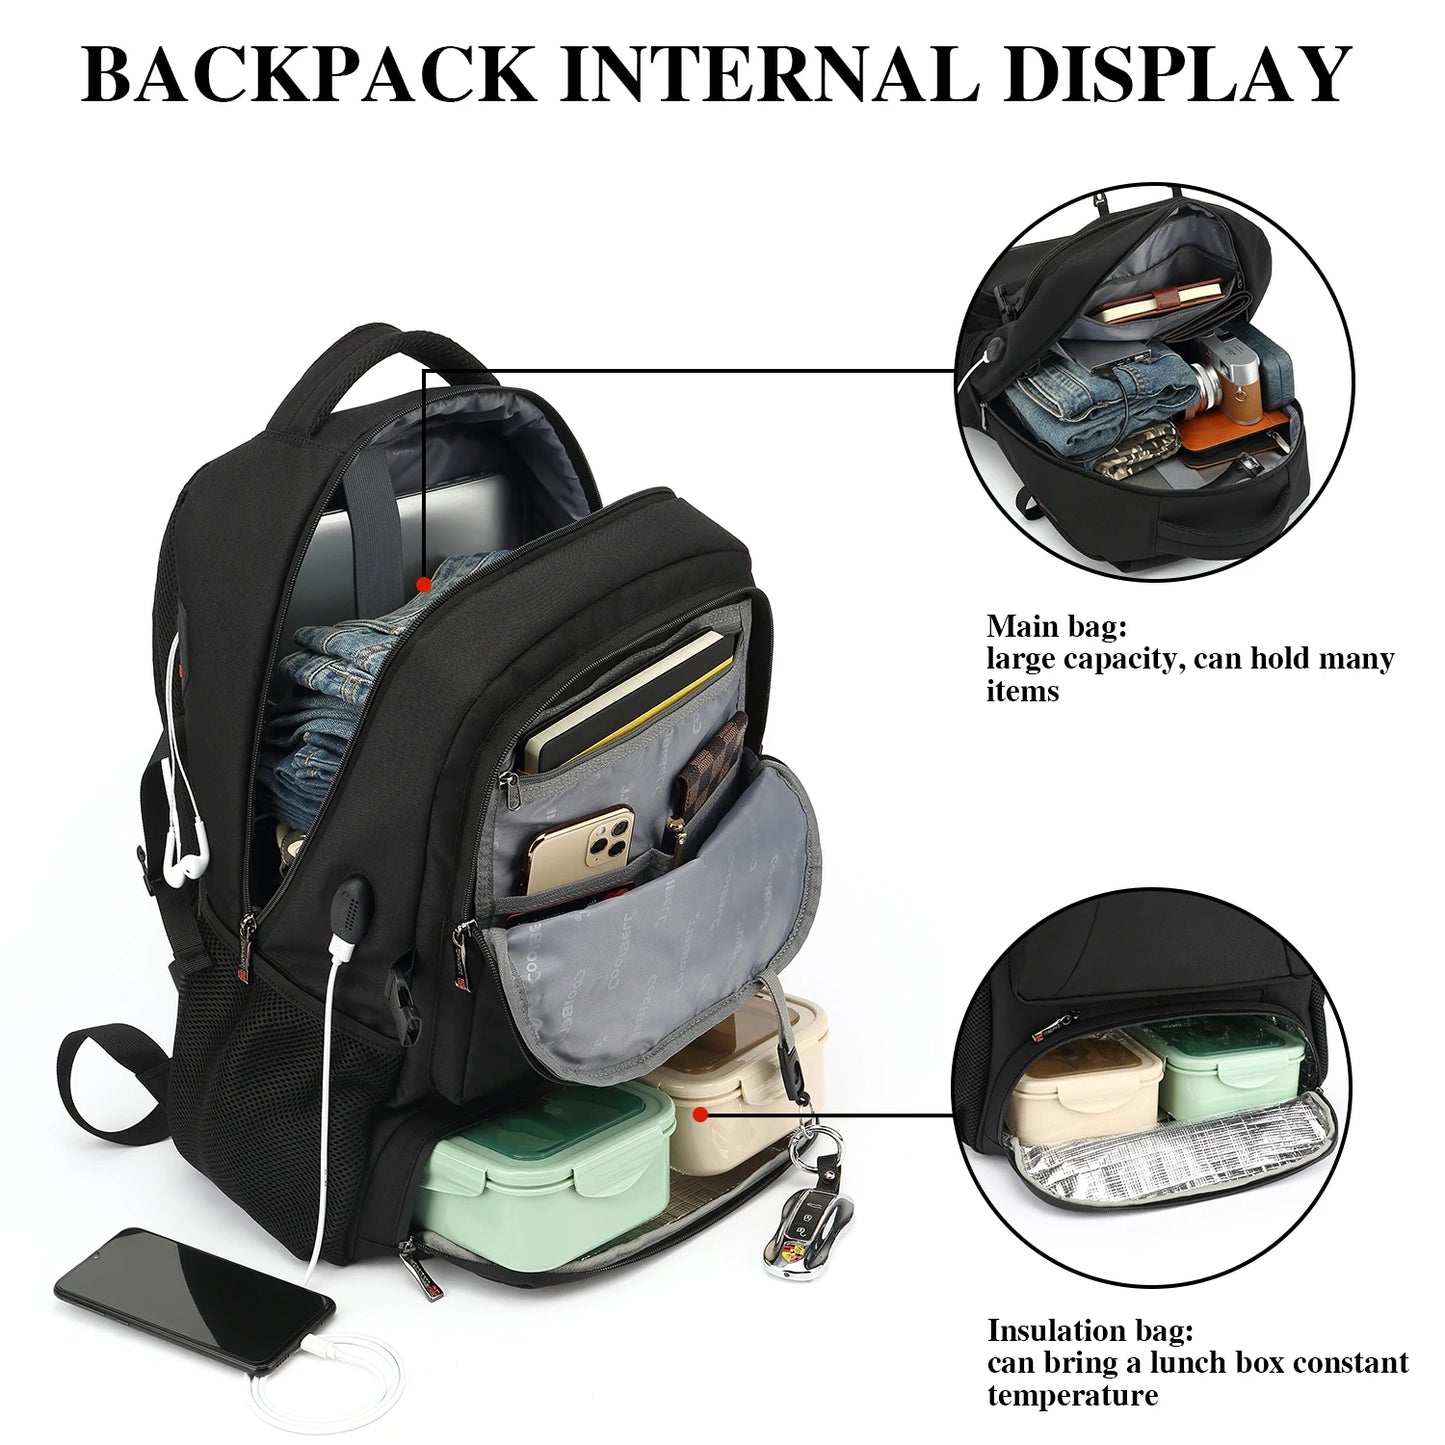 DUTRIEUX Multi-Functional Laptop Lunch Backpack with Insulated Compartment, USB Charging Port, and Ergonomic Design for Work, Travel, Hiking, and Outdoor Adventures